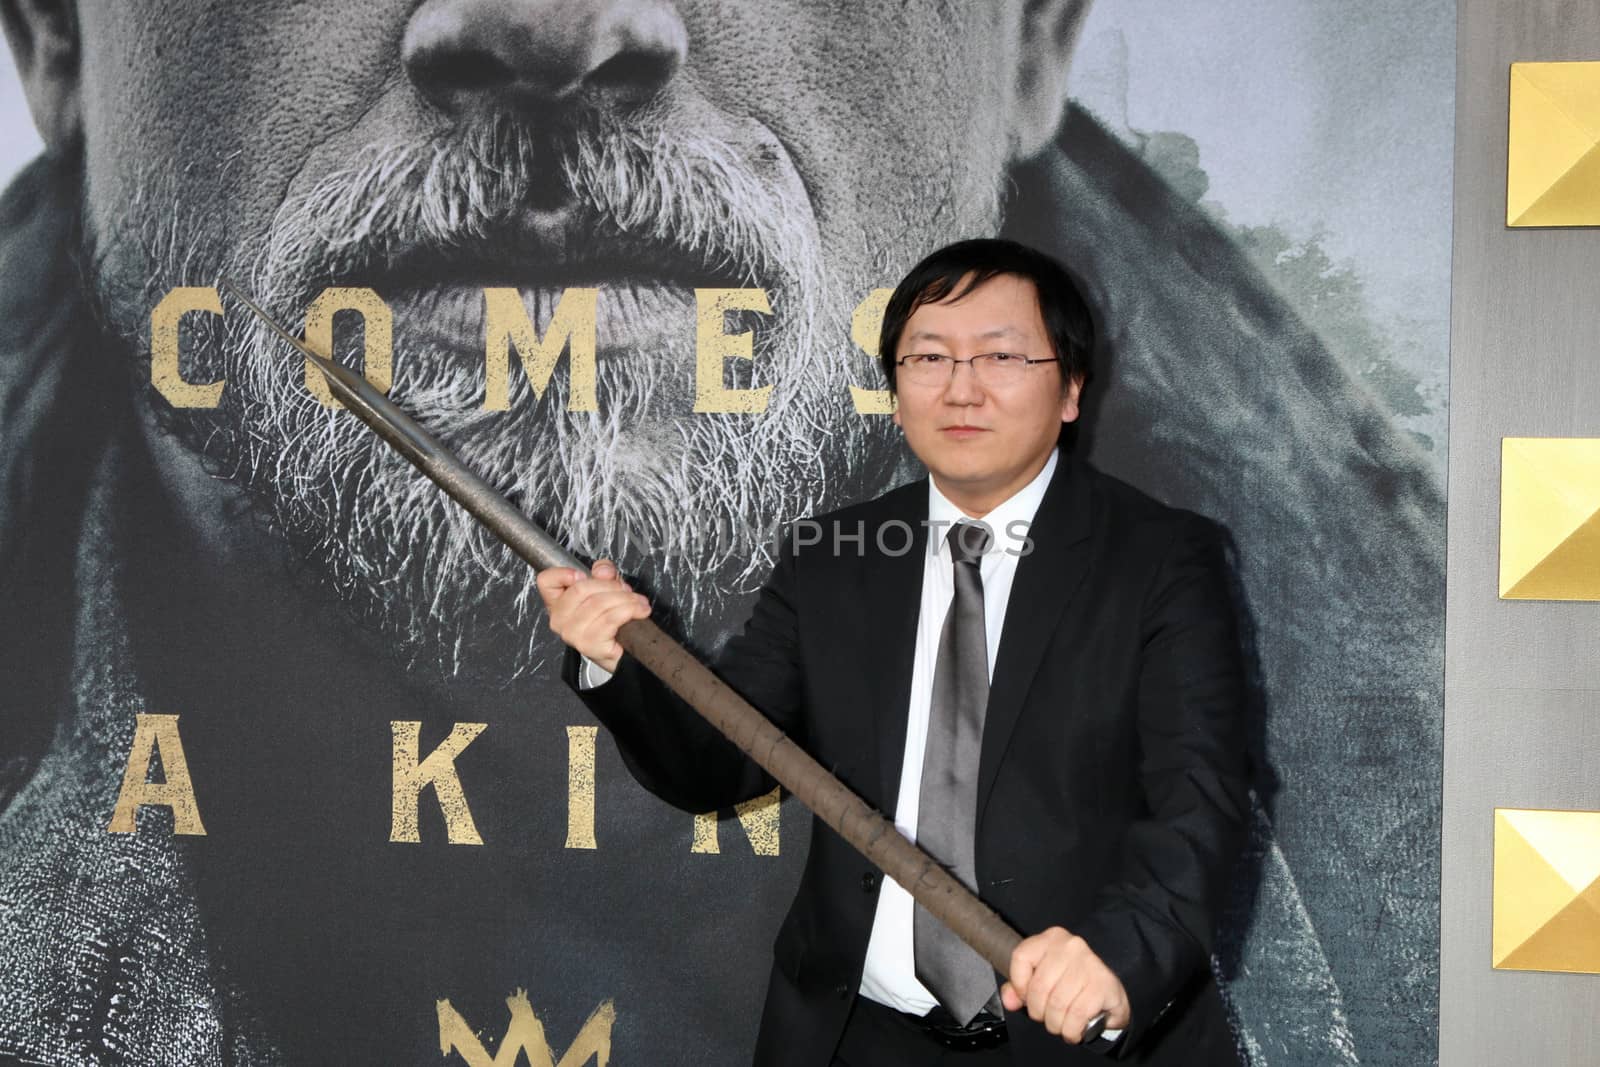 Masi Oka
at the "King Arthur Legend of the Sword" World Premiere, TCL Chinese Theater IMAX, Hollywood, CA 05-08-17/ImageCollect by ImageCollect